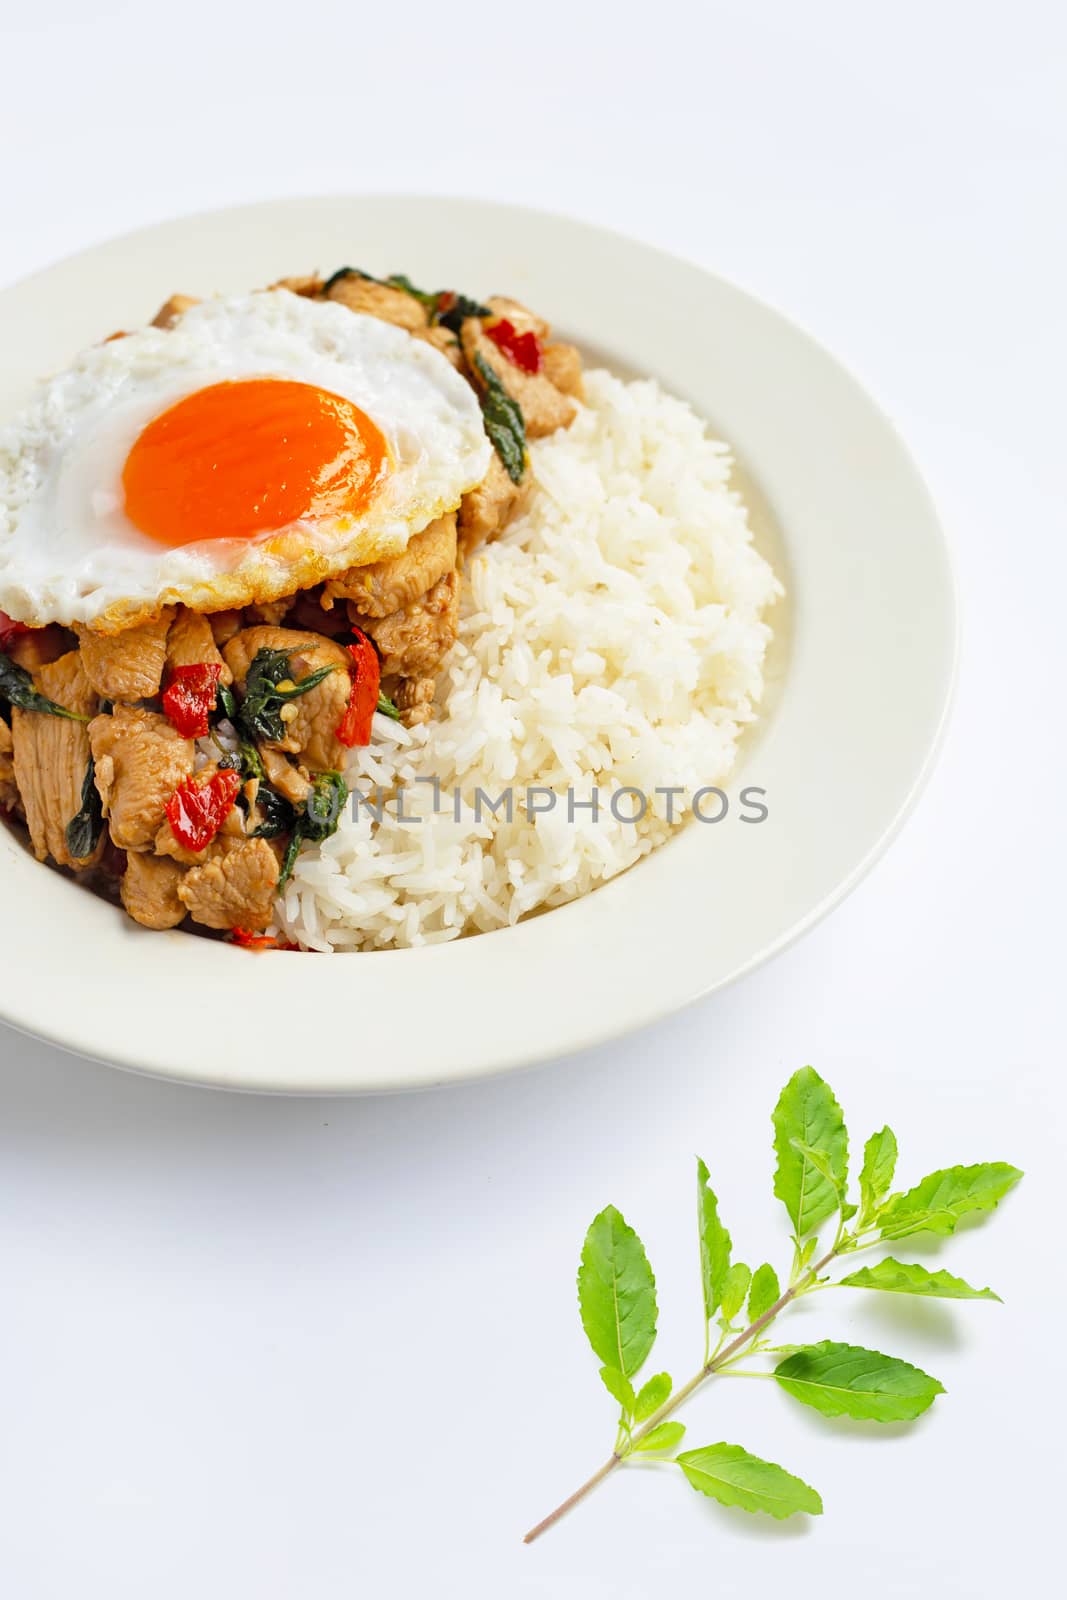 Rice topped with stir-fried chicken and holy basil, fried egg by Bowonpat